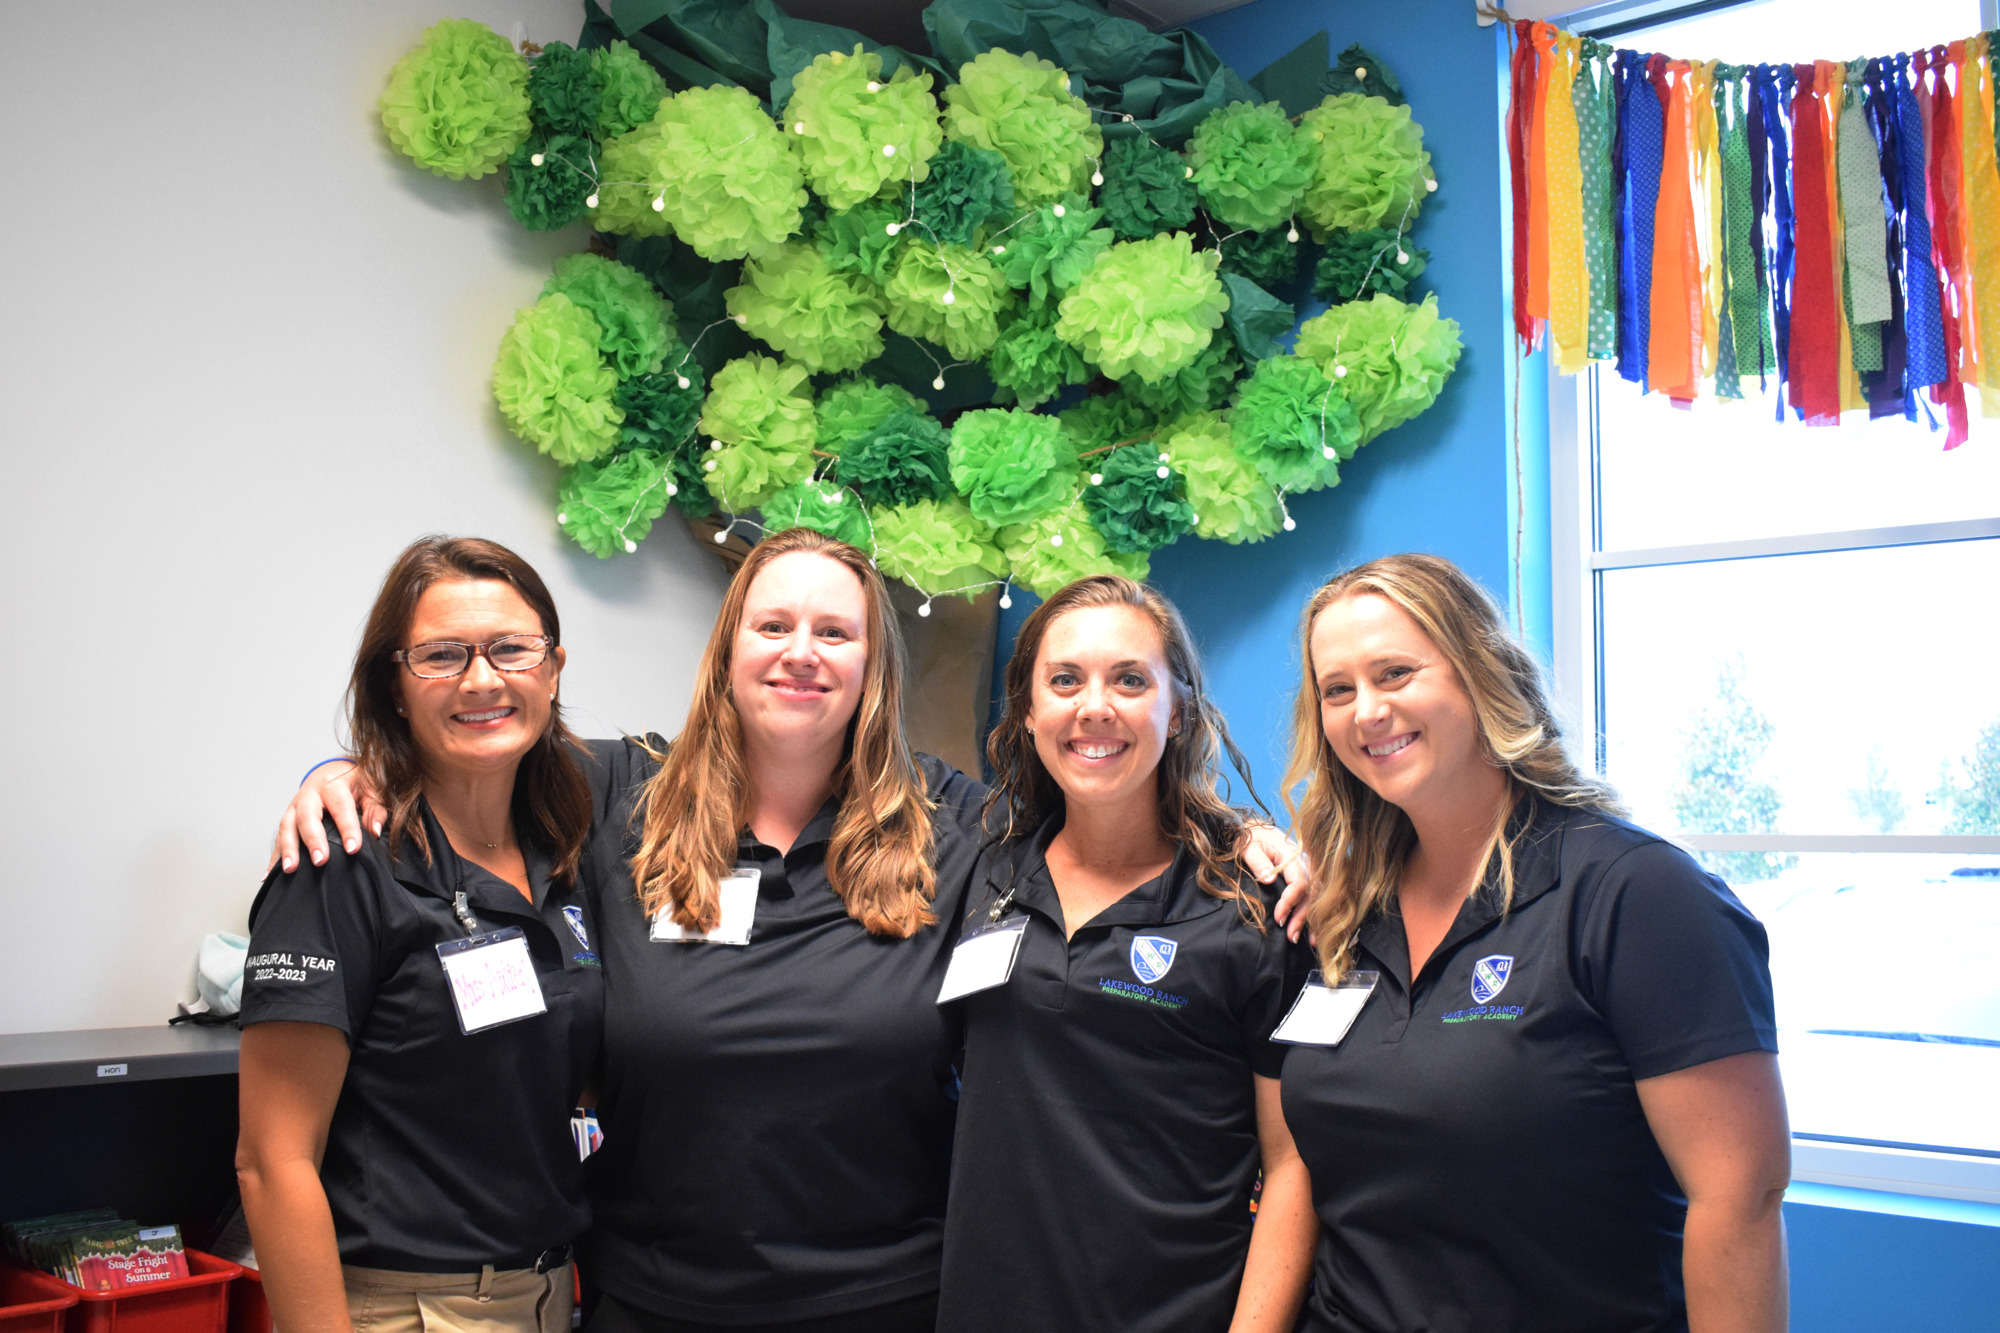 Kindergarten teachers Stacy Autrey, Katrina Zagroba-Kamal, Cayse Imhoff and Kristina Kushto look forward to having their kindergarten village together and being able to help students based on their needs. (Photo by Liz Ramos)